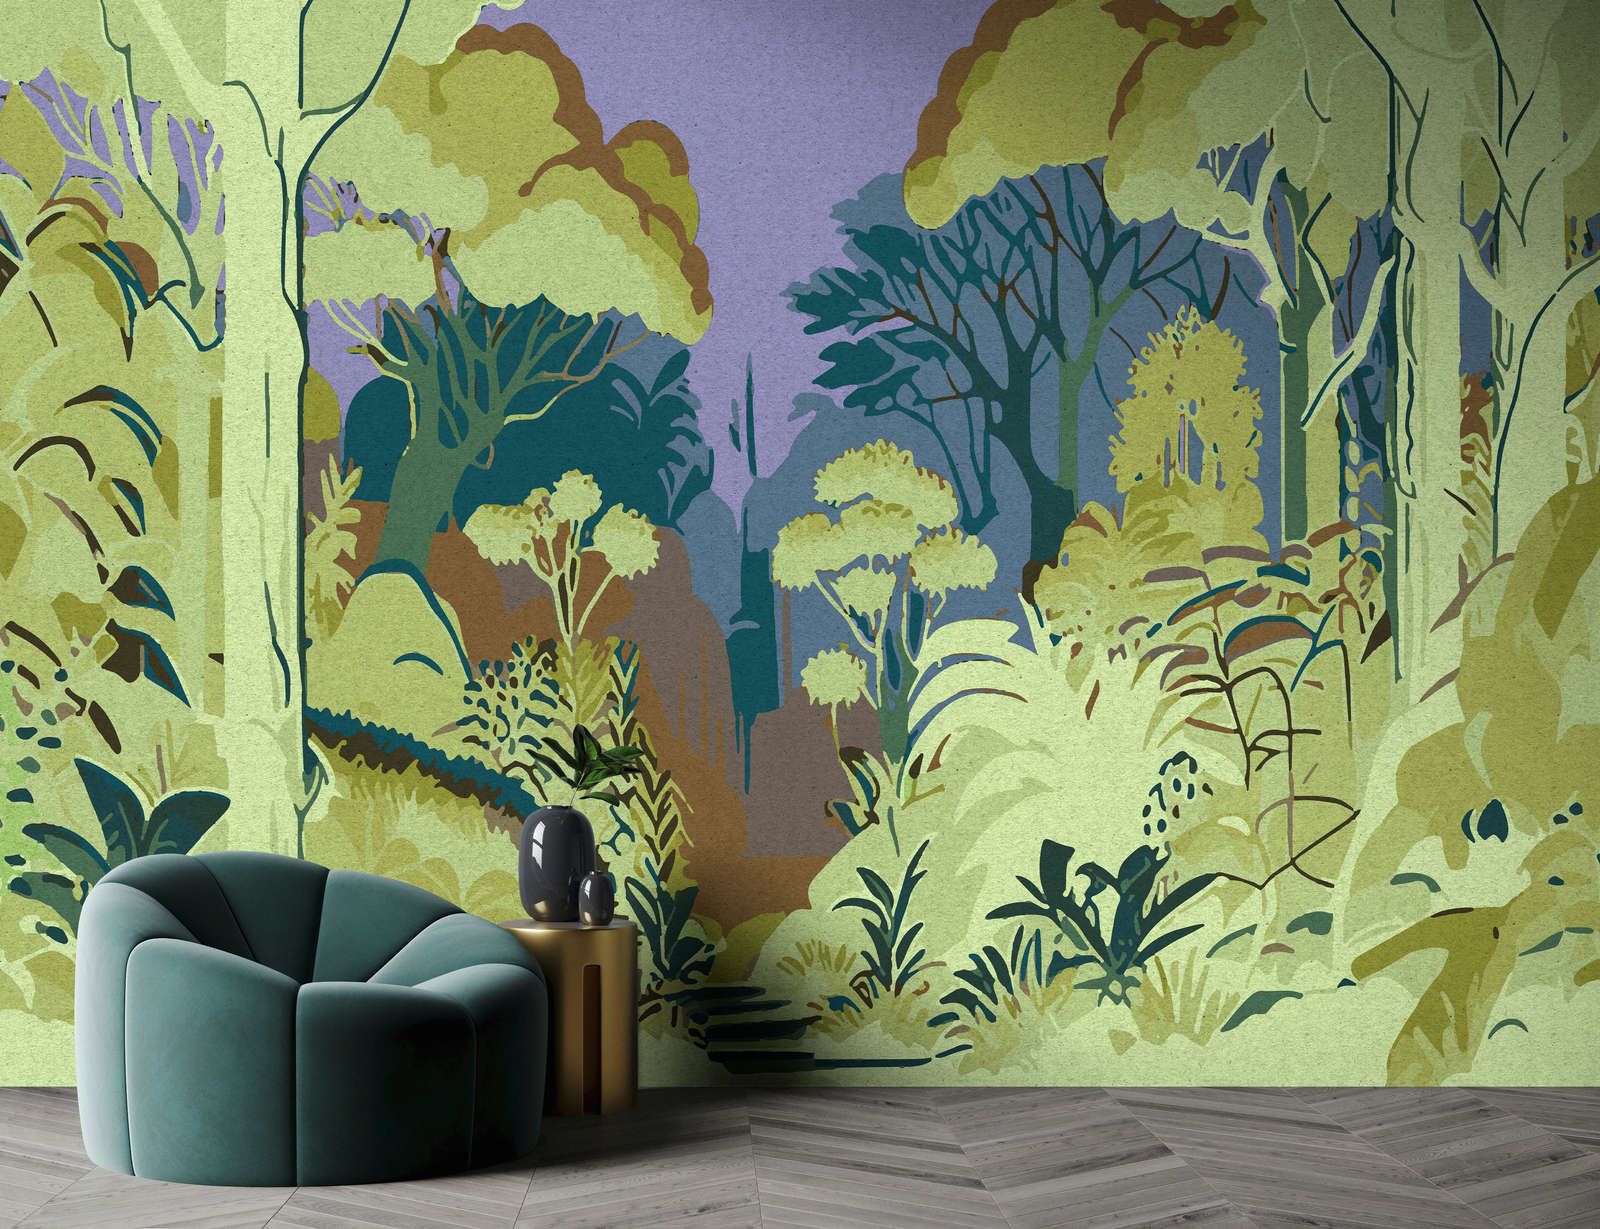             Photo wallpaper »runa« - Abstract jungle motif with kraft paper texture - Smooth, slightly shiny premium non-woven fabric
        